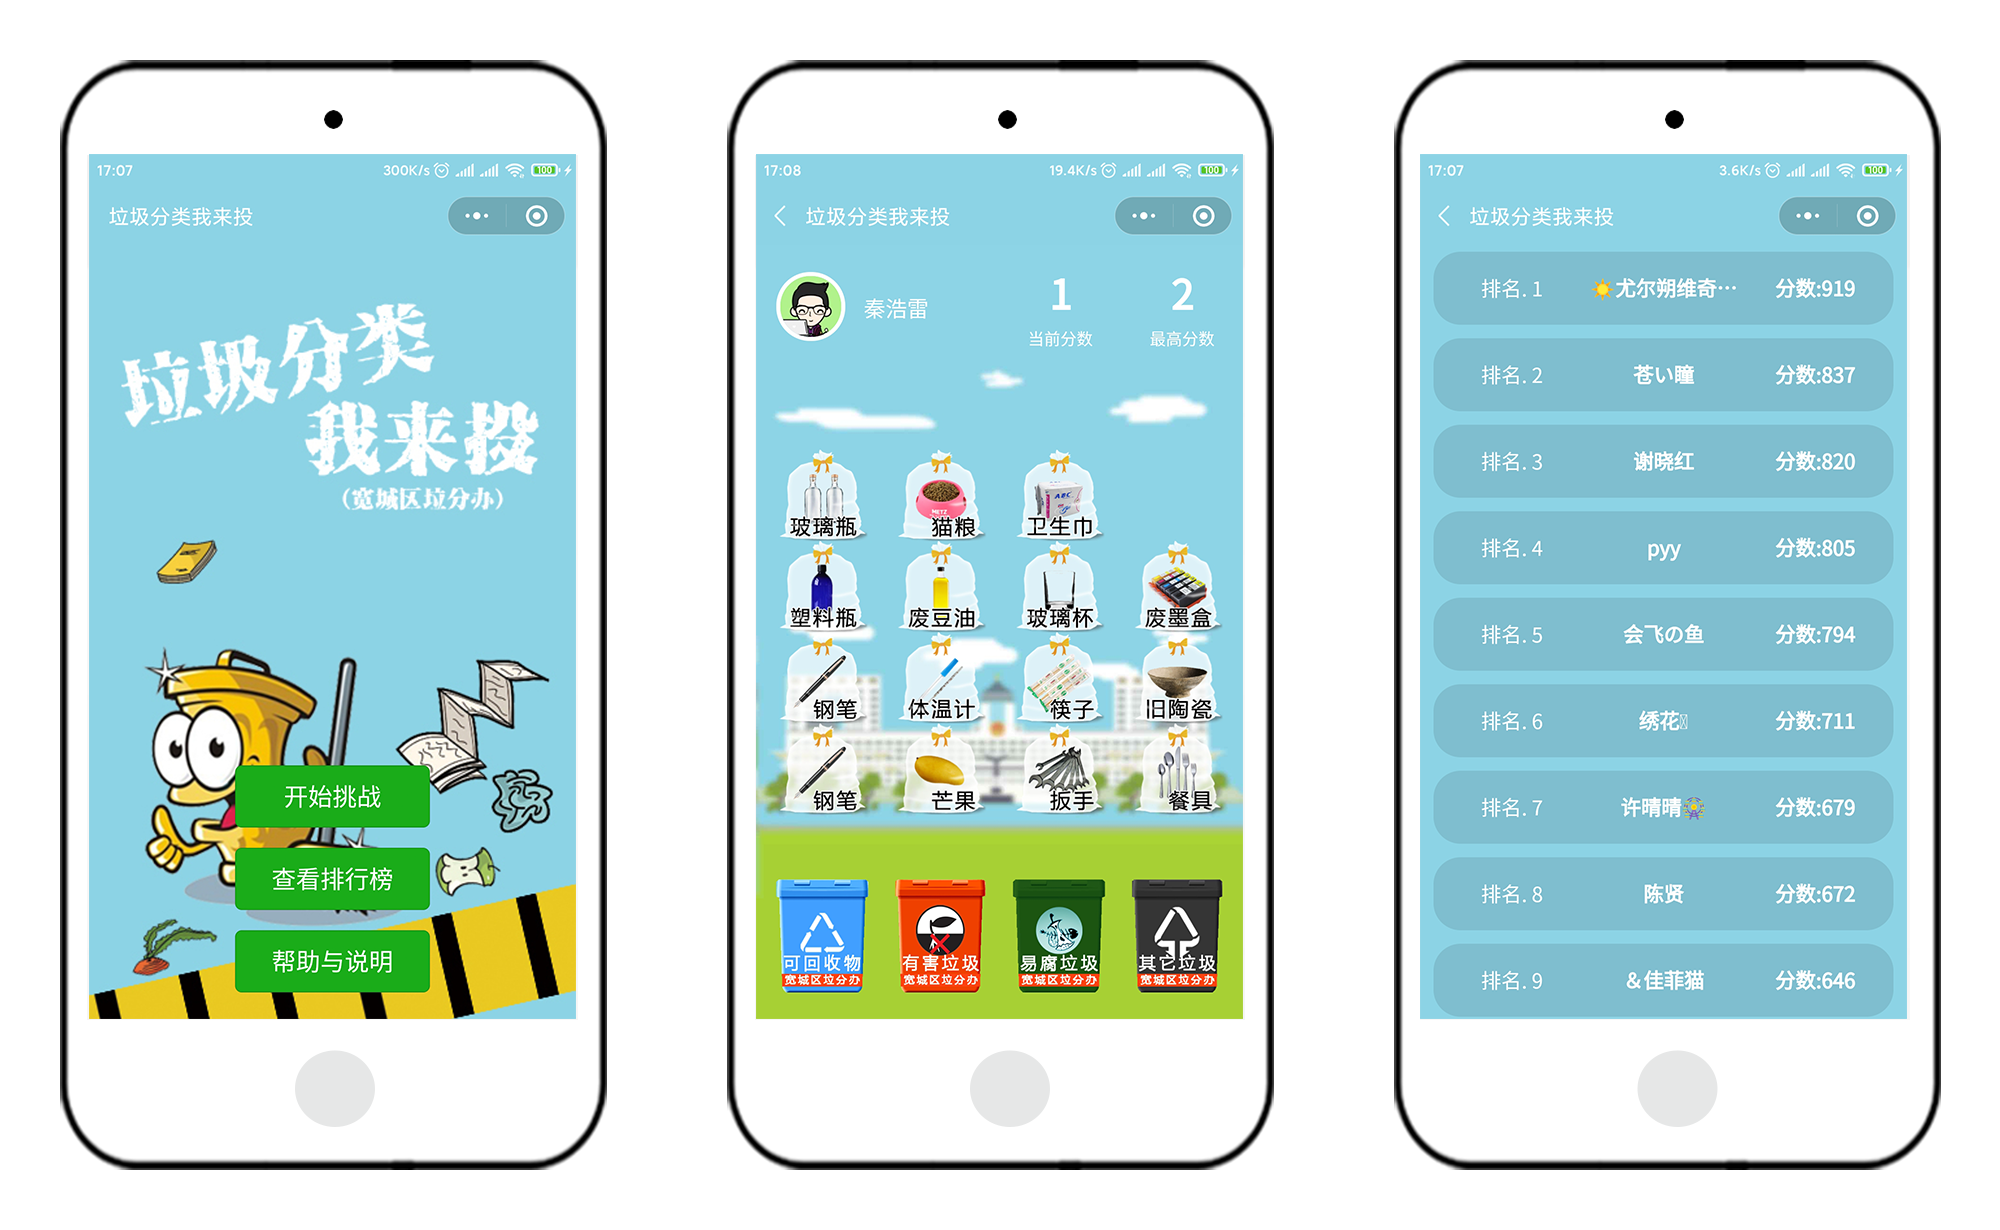 WeChat Mini Game for Garbage Classification